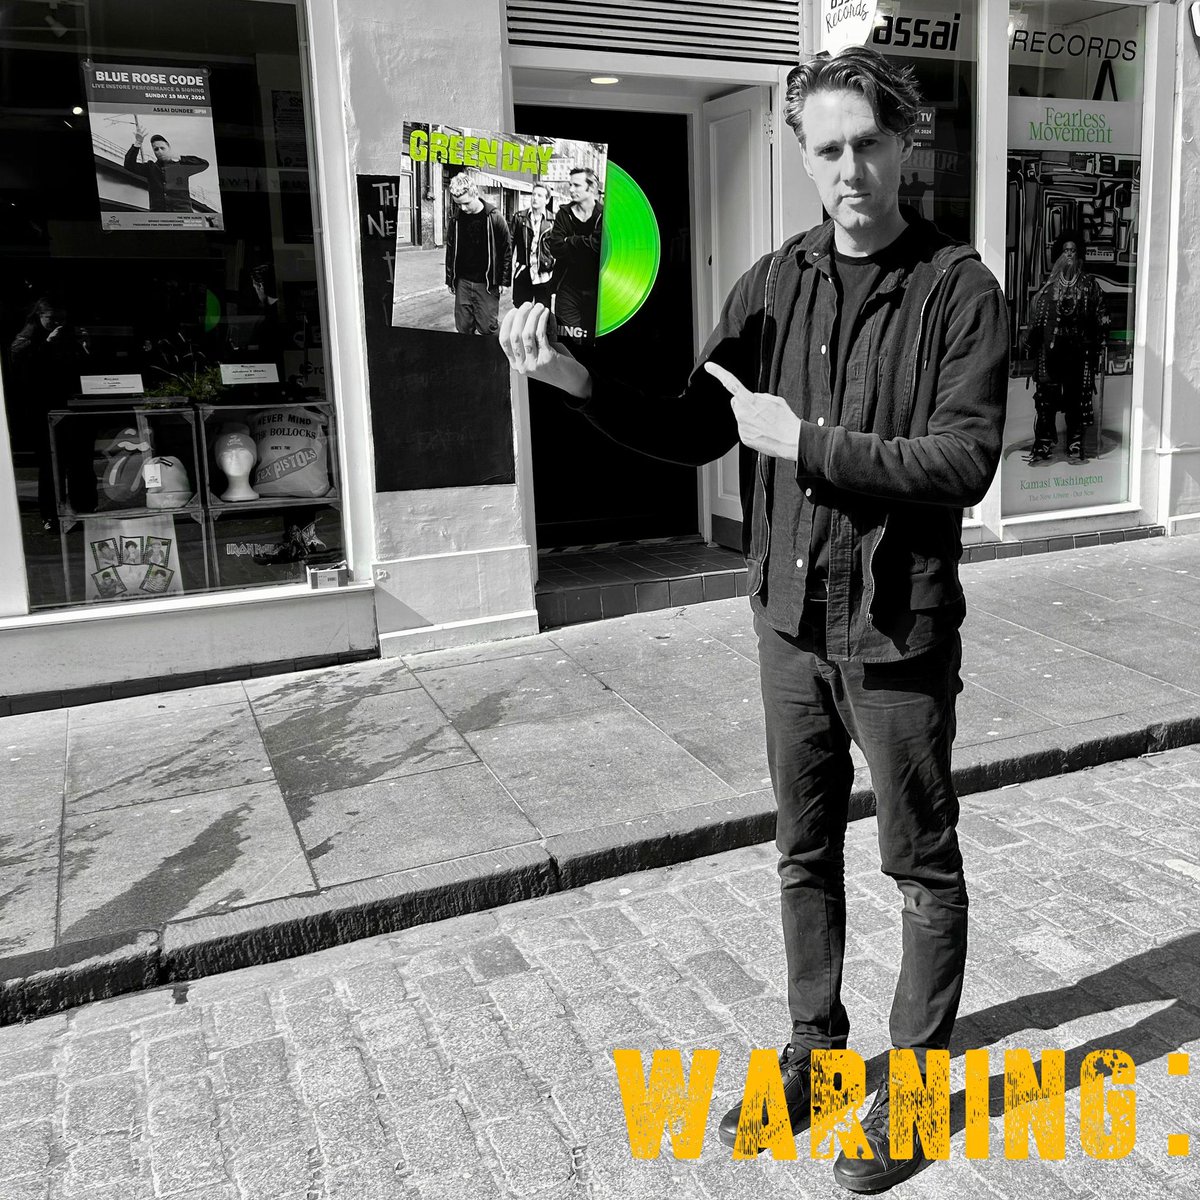 * GREEN DAY WARNING REISSUE! * Oh yes! This LONG overdue @GreenDay reissue landed today, coming on Fluorescent Green vinyl! #Warning used to soundtrack this guys marathon LMA Manager sessions when he was 14. Rammed full of absolute TUNES! 👉tinyurl.com/WarningAssai #GreenDay